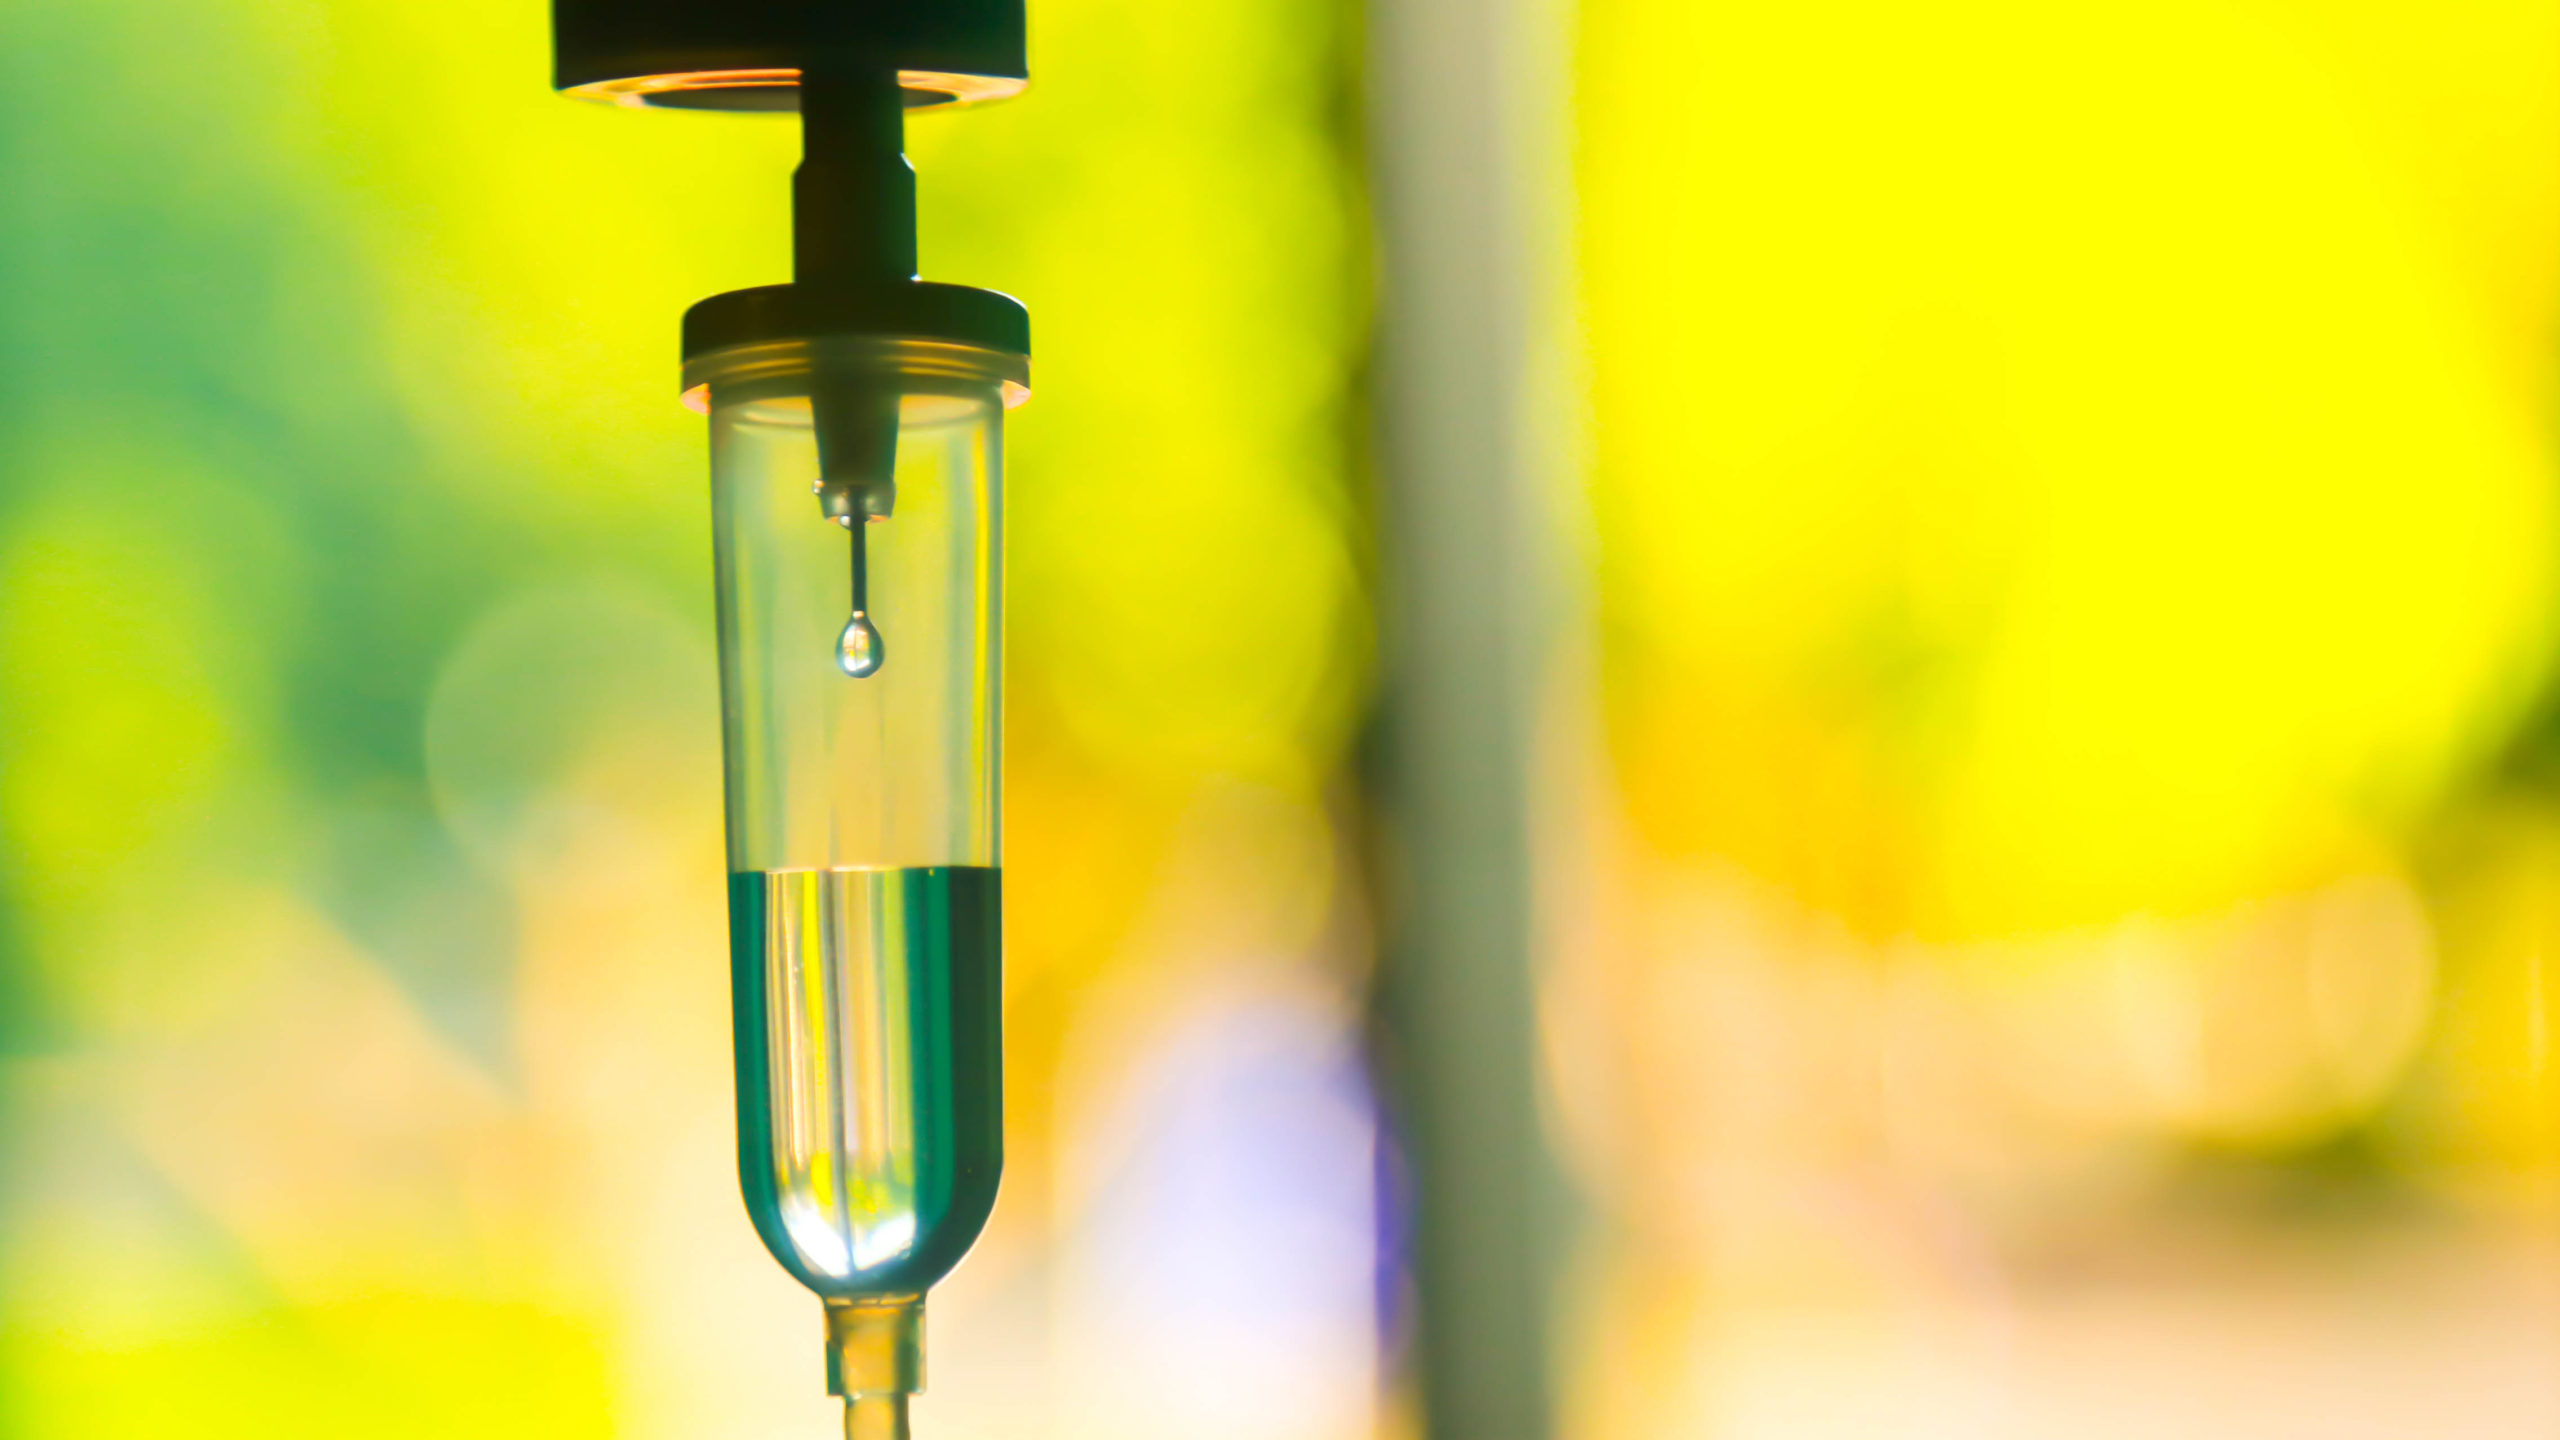 iv vitamin drip with a yellow and green background